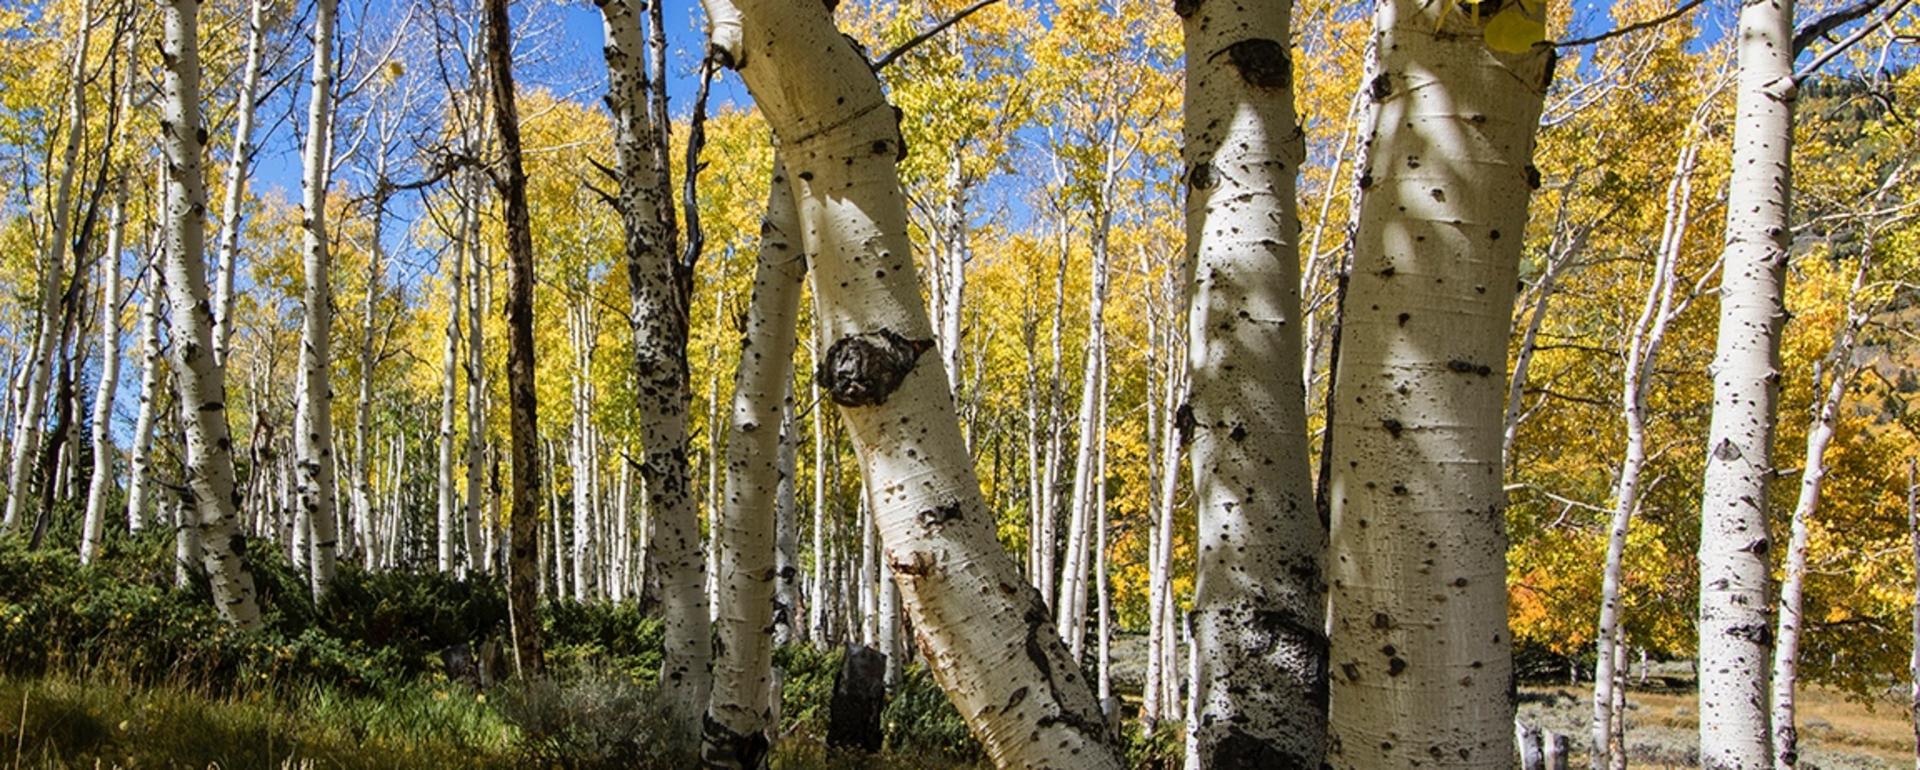 Pando as barometer for aspen across the West?